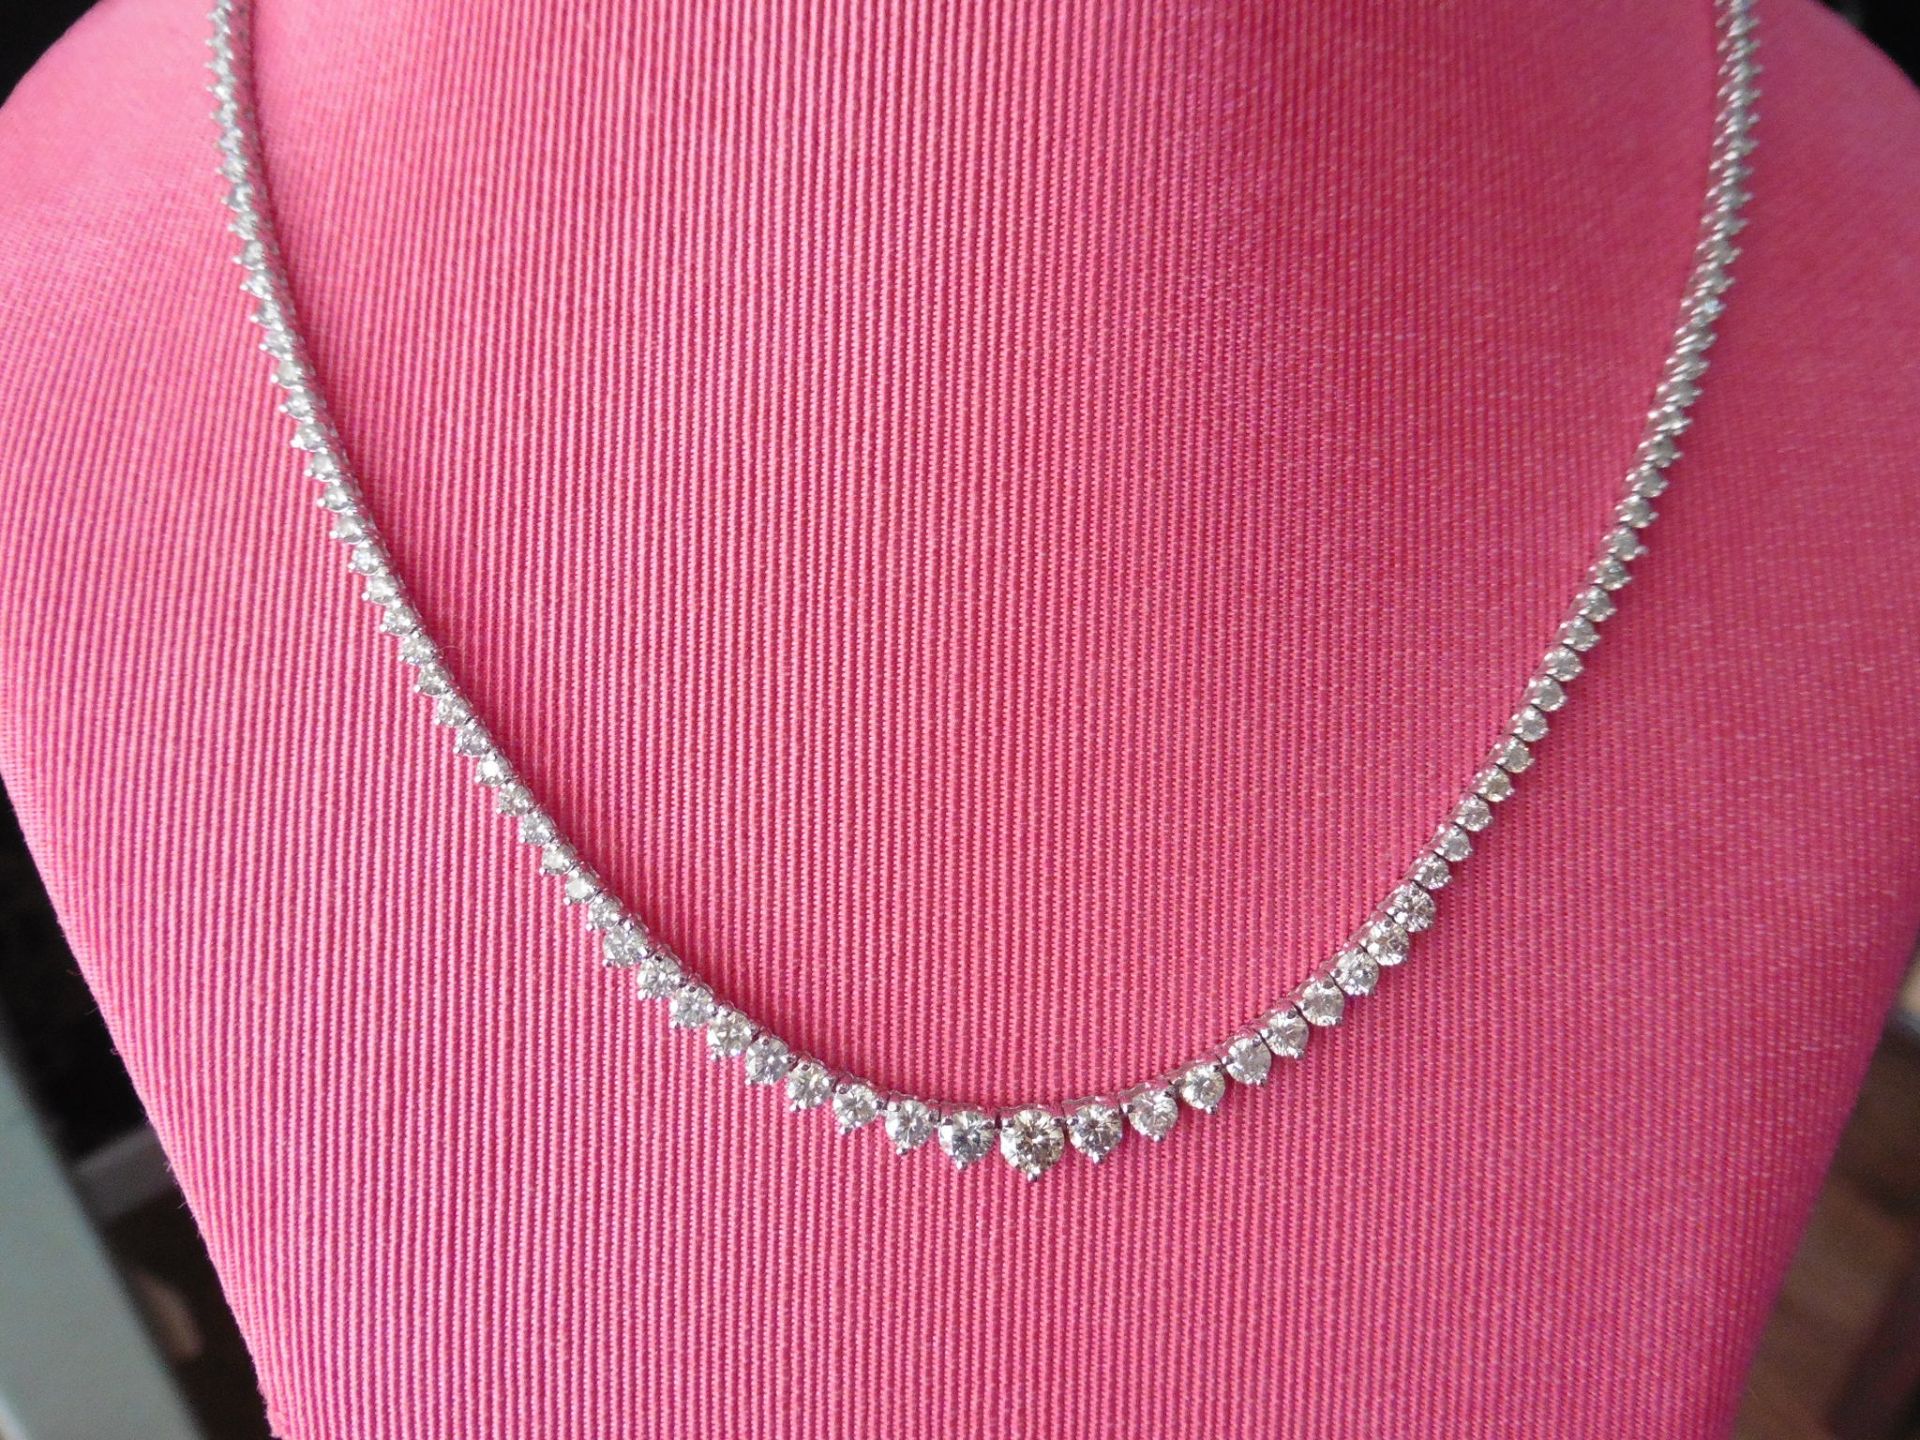 15ct Diamond tennis style necklace. 3 claw setting. Graduated diamonds, I colour, Si2 clarity - Image 3 of 3